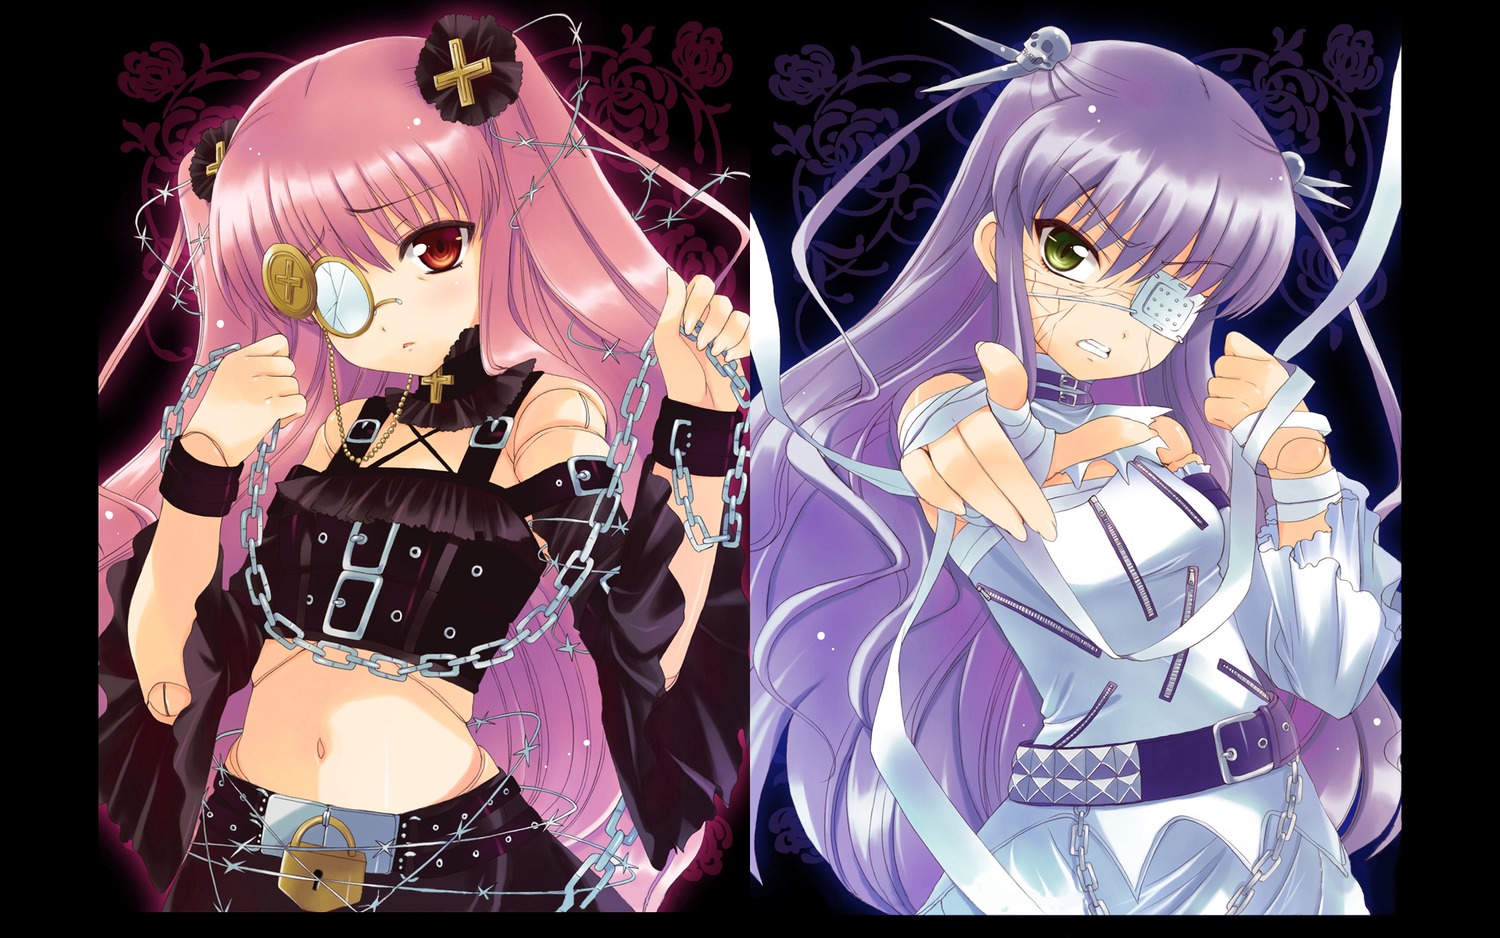 2girls bandages barasuishou barbed_wire belt chain collar cuffs doll_joints eyepatch god_hand_(artist) handcuffs highres image joints kirakishou long_hair midriff monocle monocle_chain multiple_girls pair photoshop_(medium) pink_hair purple_hair red_eyes rose rozen_maiden twintails